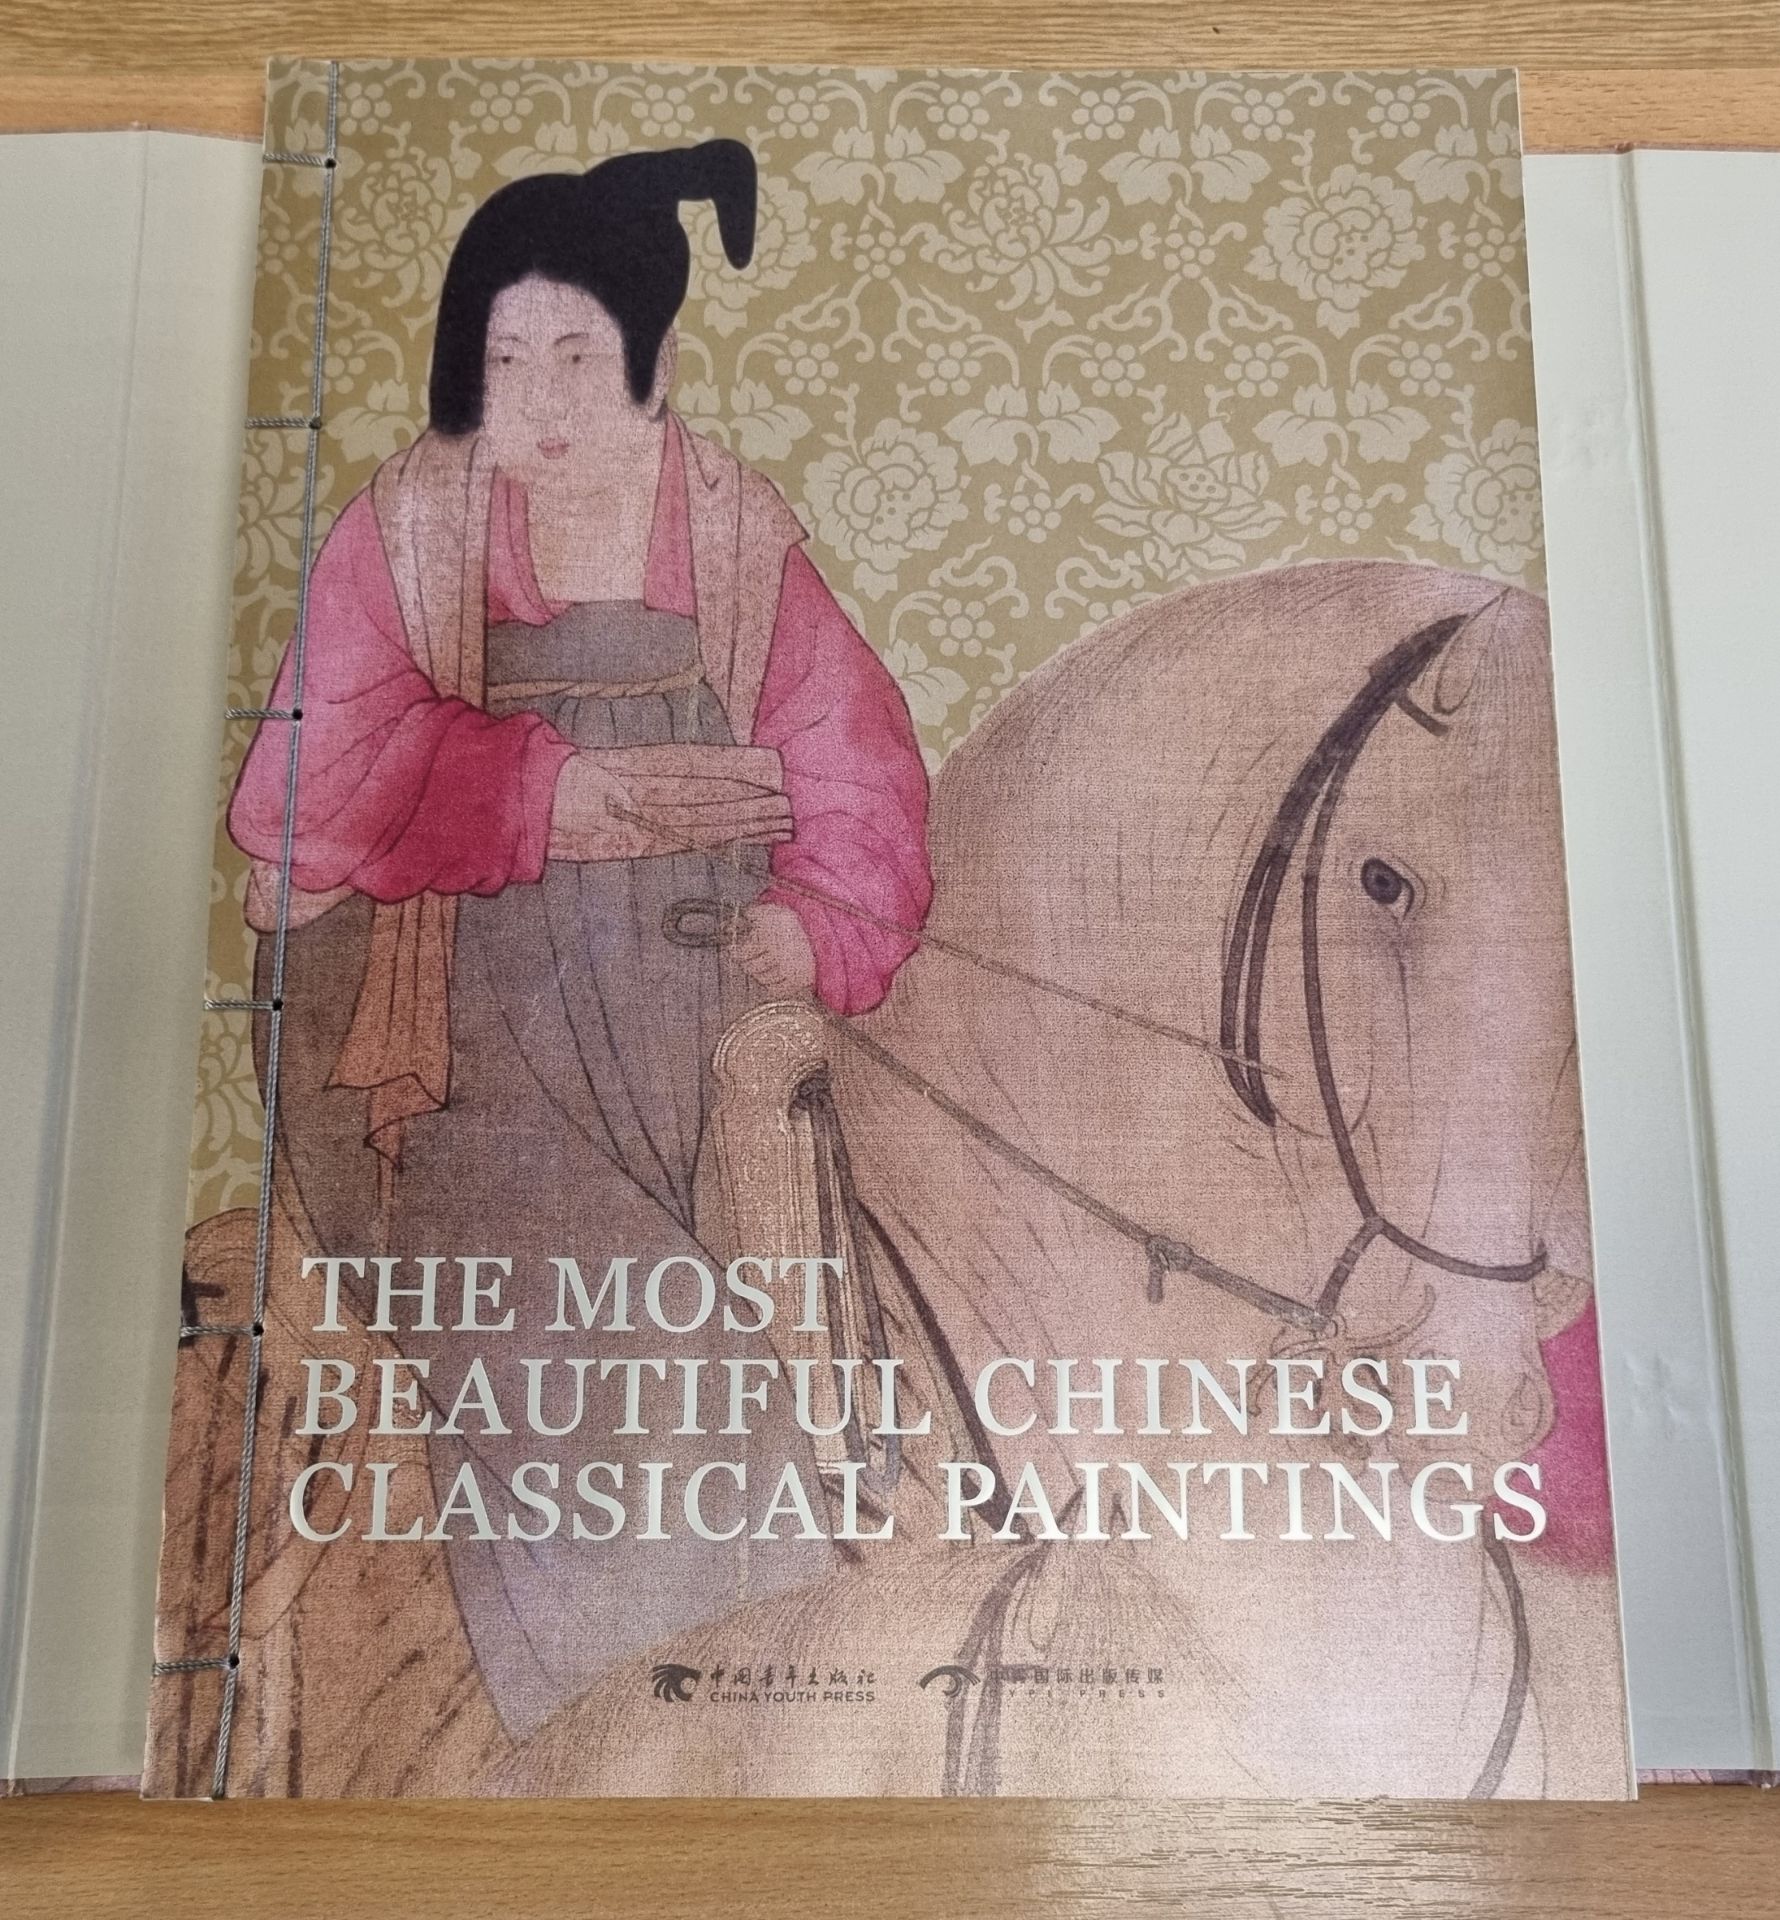 The Most beautiful Chinese classical paintings hardcover book - Image 3 of 7